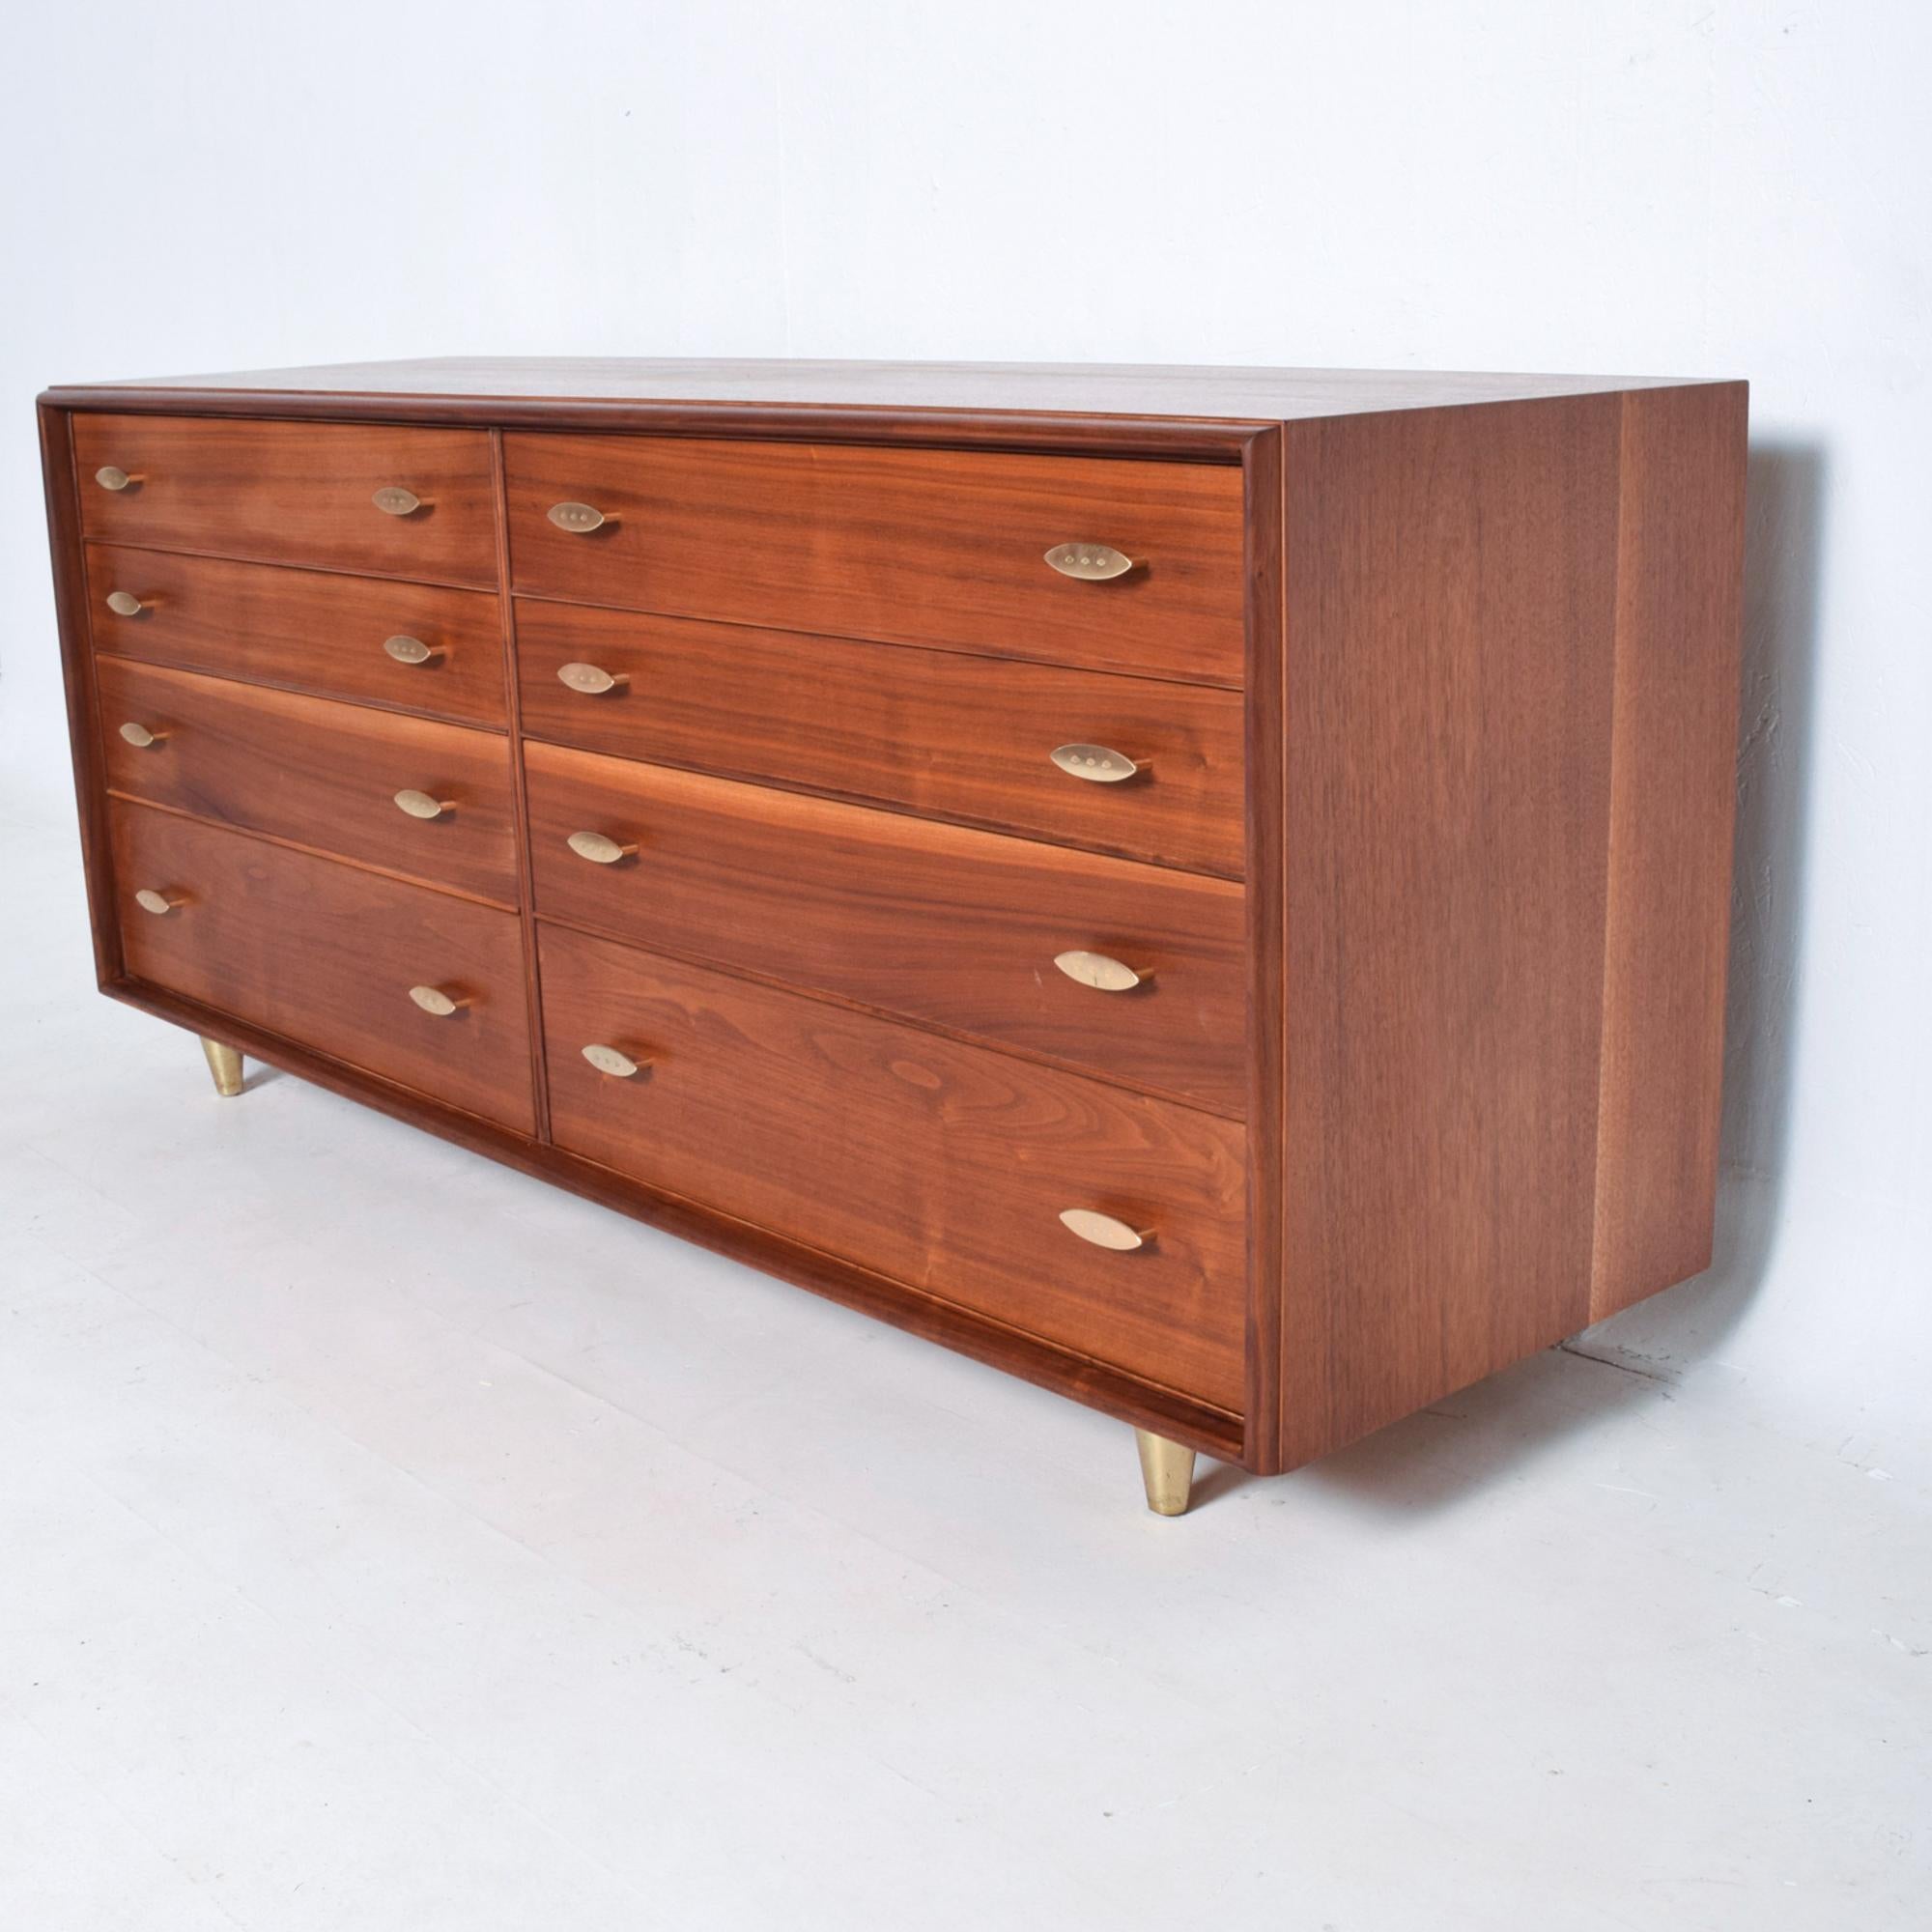 For your consideration: Mid-Century Modern walnut double dresser by Paul Frankl for John Stuart.
Fabulous detail fancy brass handle pulls set off on stand out brass legs. Sensational!
Double dresser in walnut wood with original brass plated